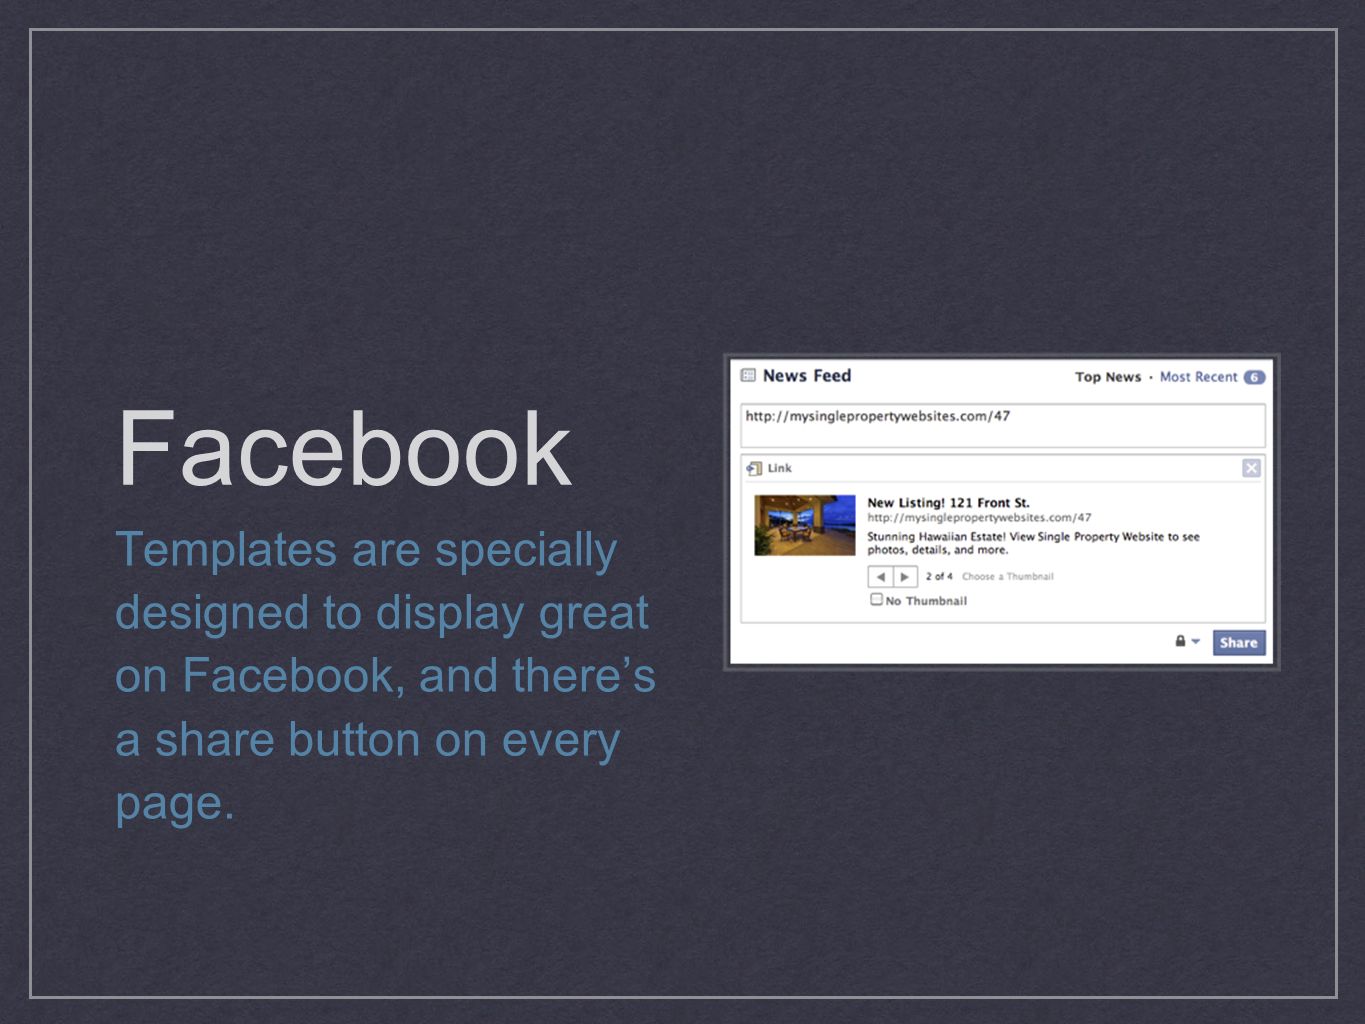 Facebook Templates are specially designed to display great on Facebook, and theres a share button on every page.